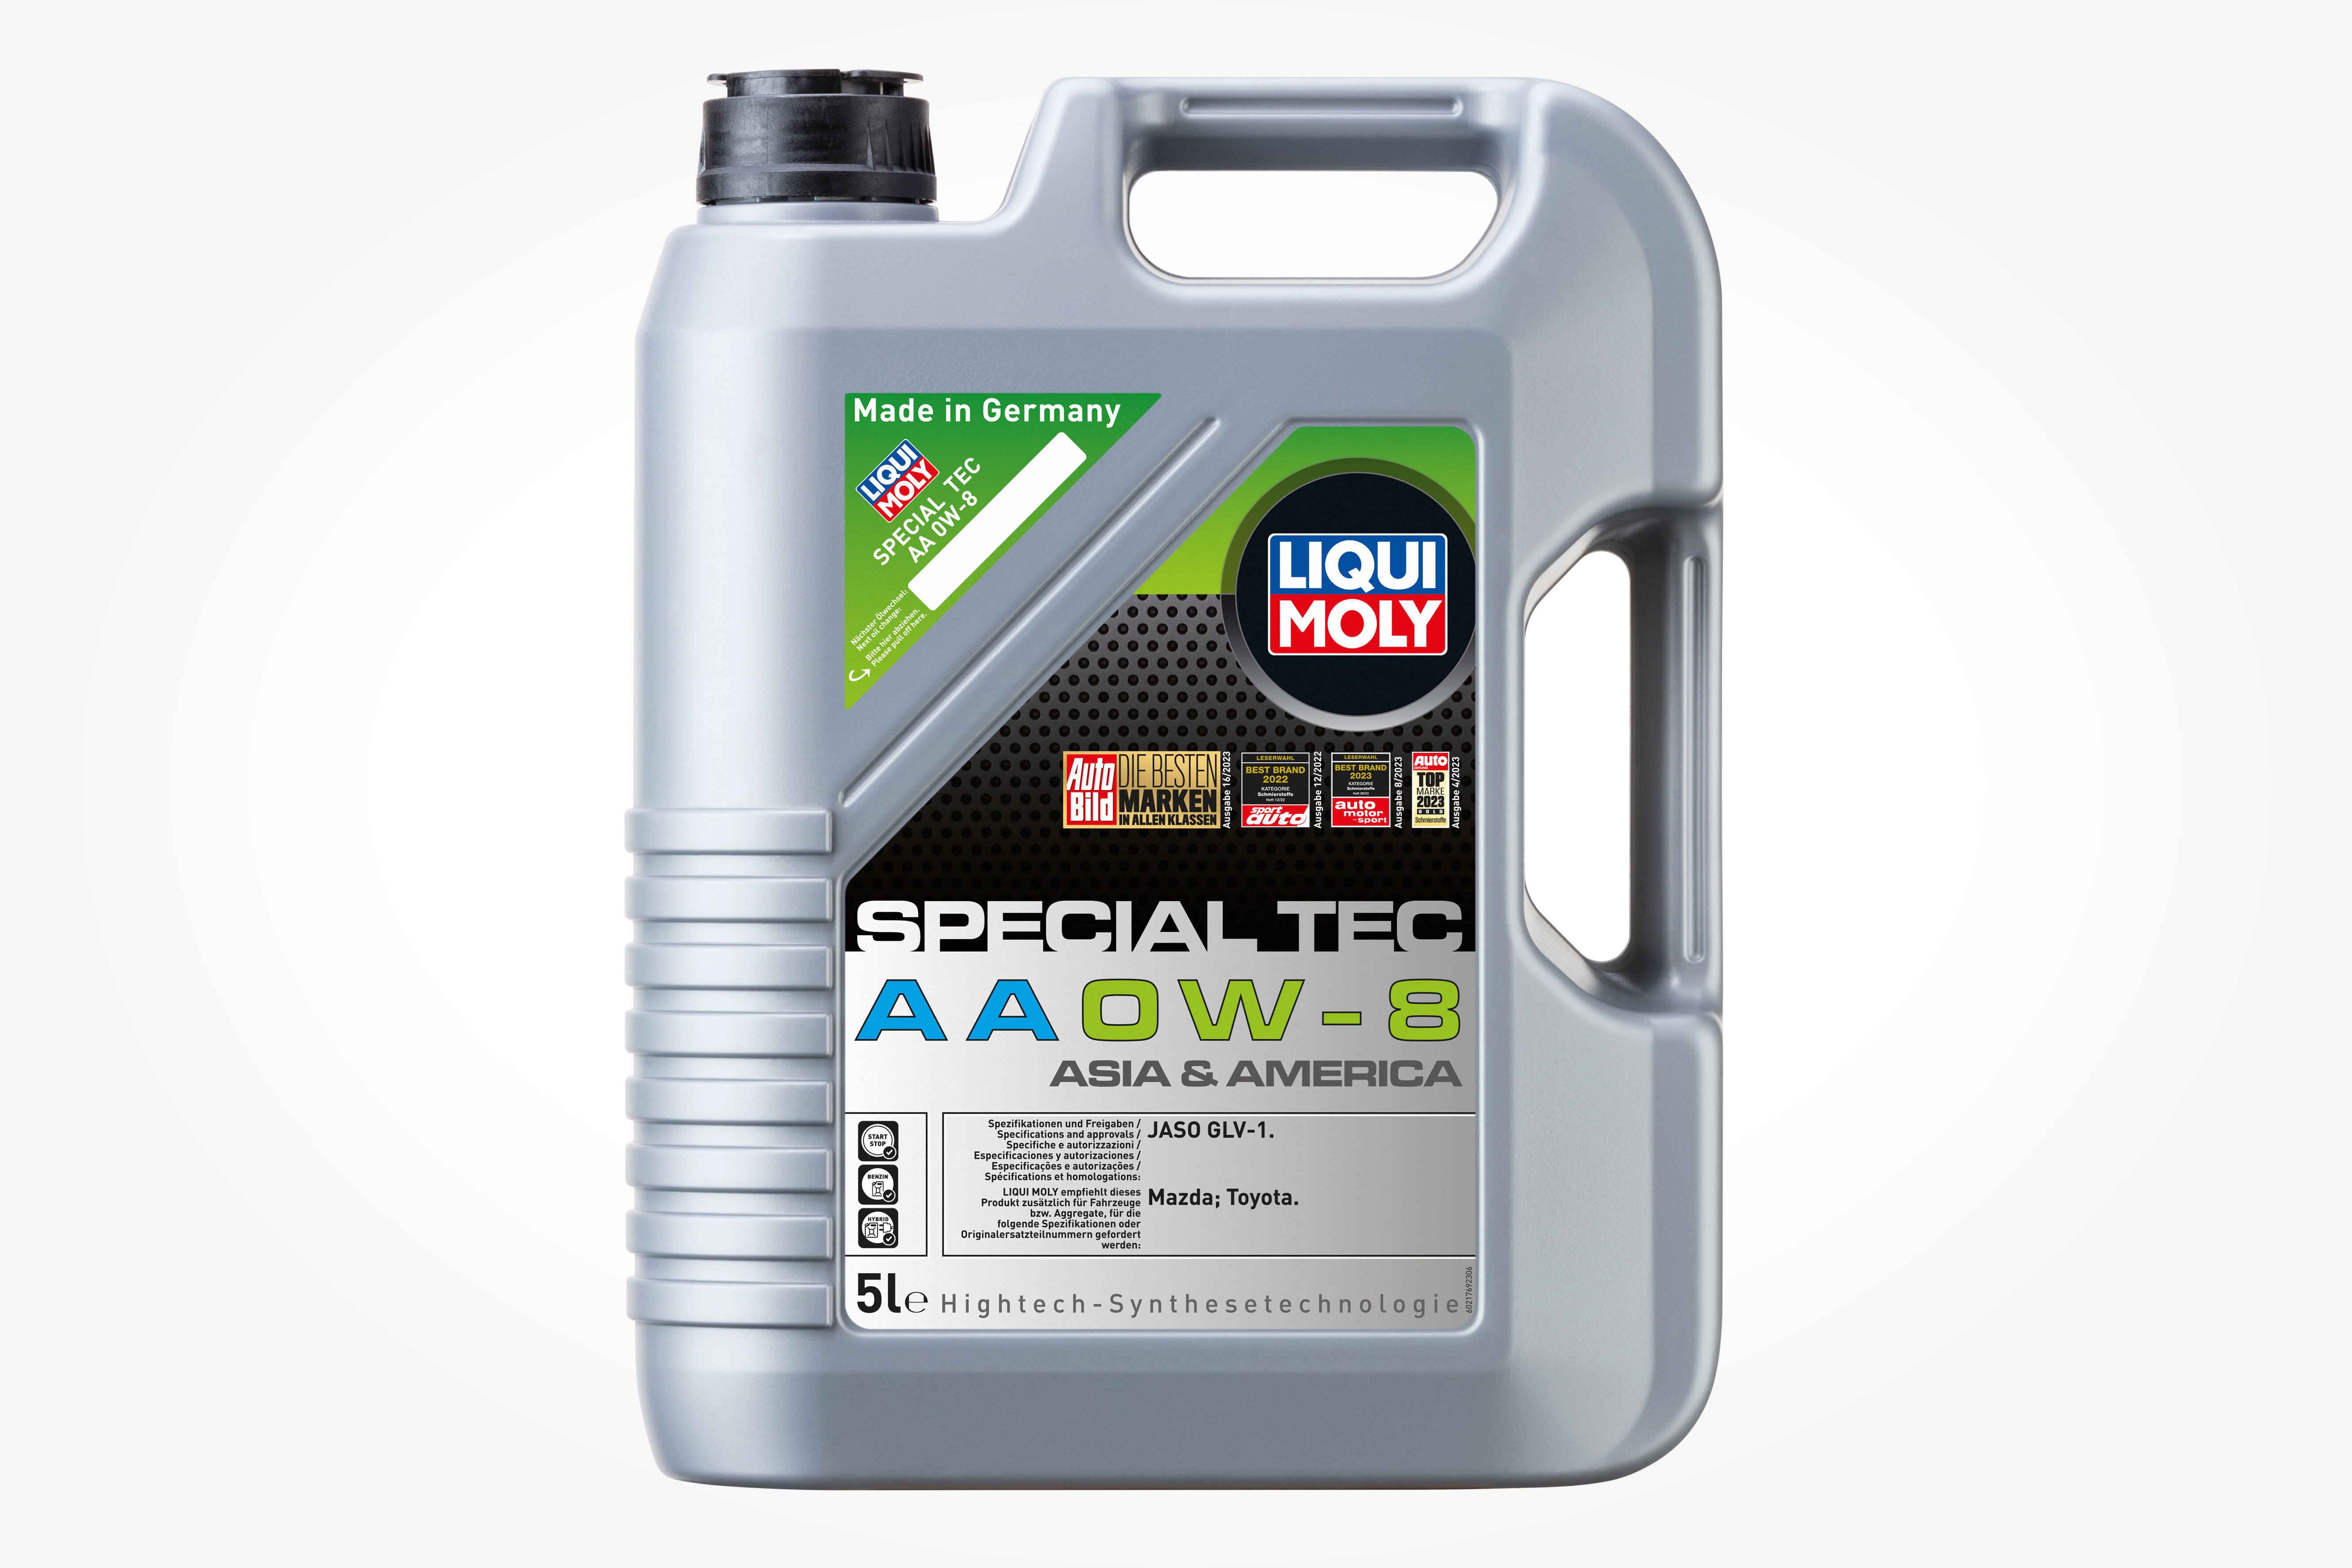 New motor oil for Mazda and Toyota models: LIQUI MOLY Special Tec AA 0W-8